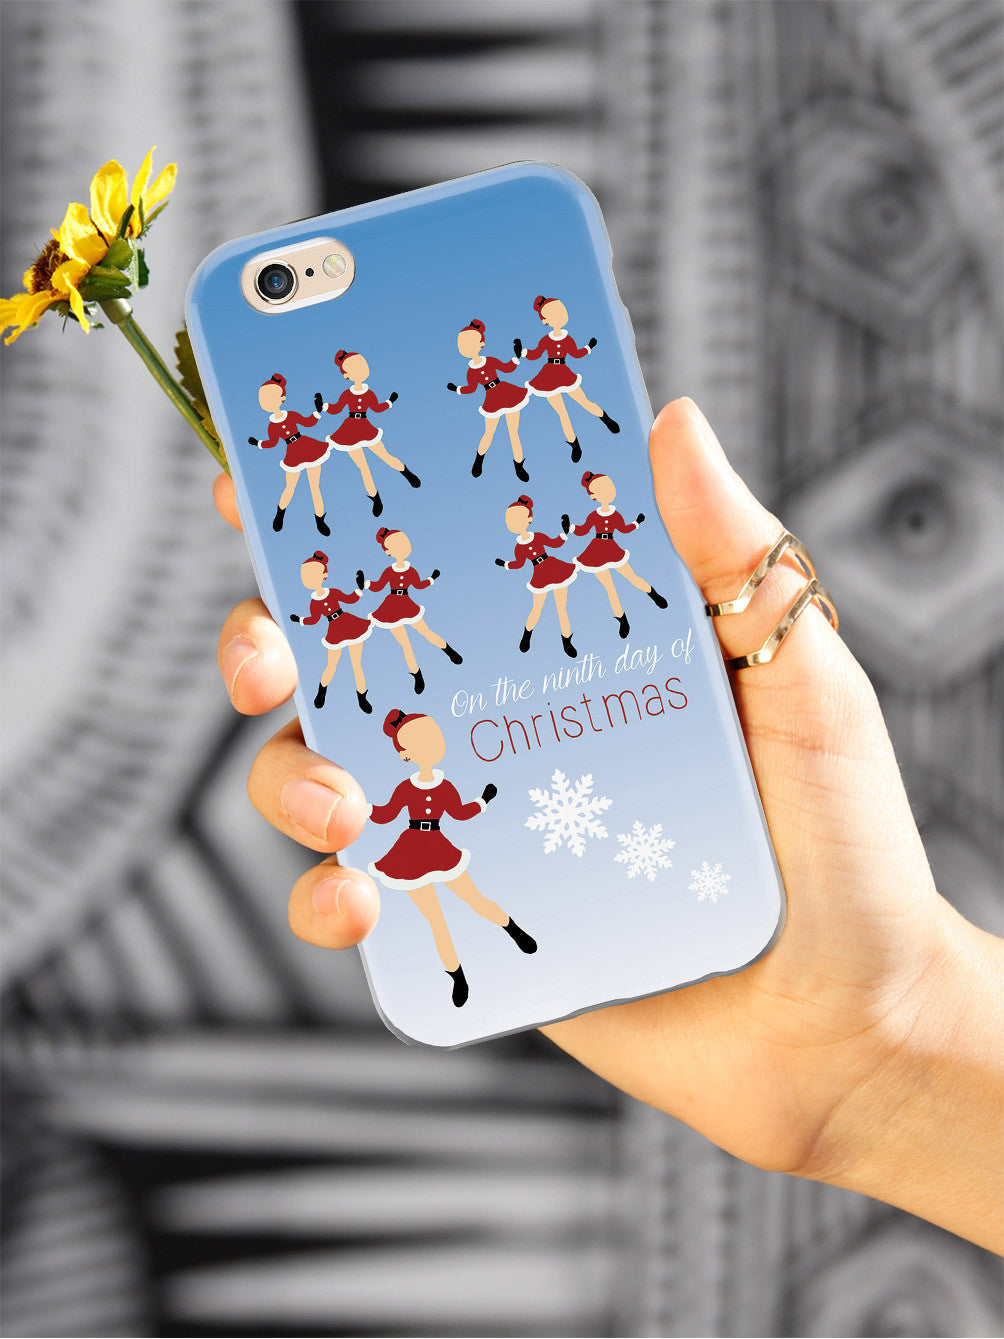 On the Ninth Day of Christmas - 9 Ladies Dancing Case